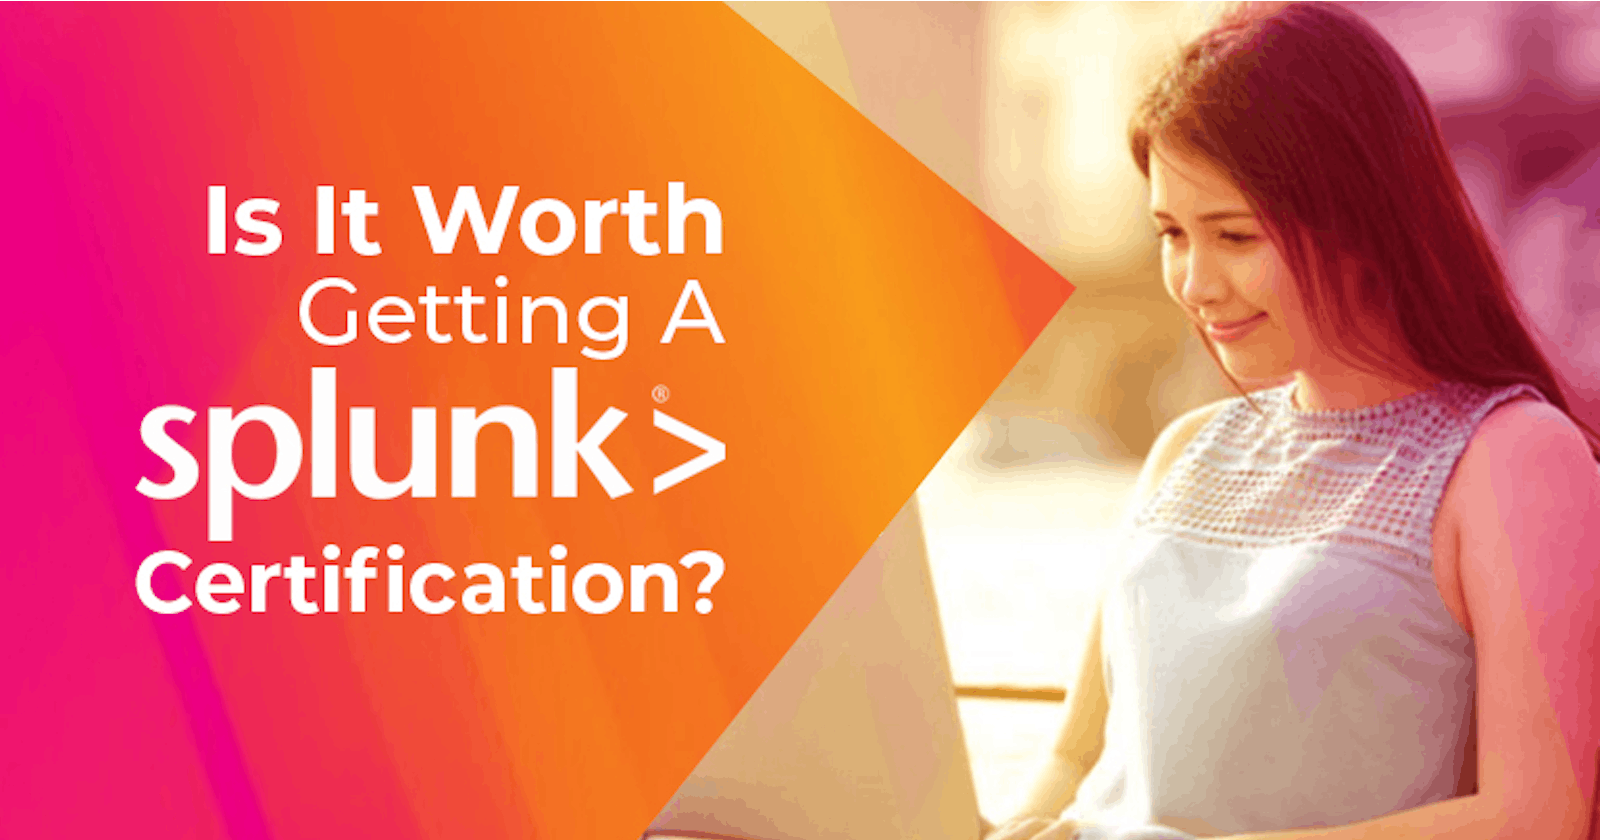 What Is Splunk And Why Get Certified?